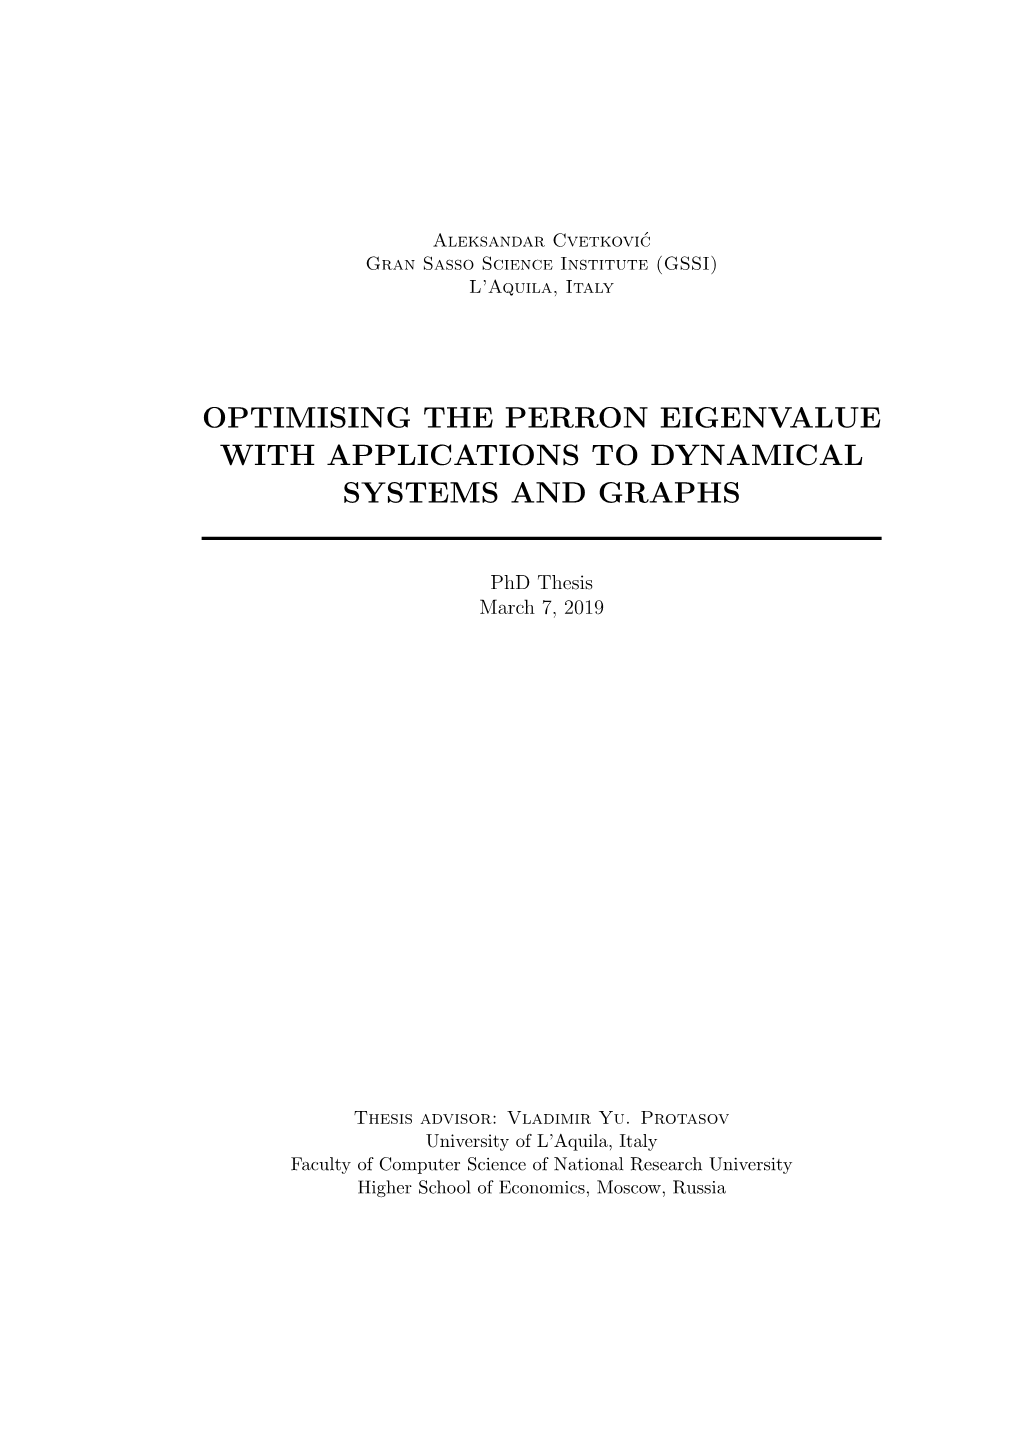 Optimising the Perron Eigenvalue with Applications to Dynamical Systems and Graphs